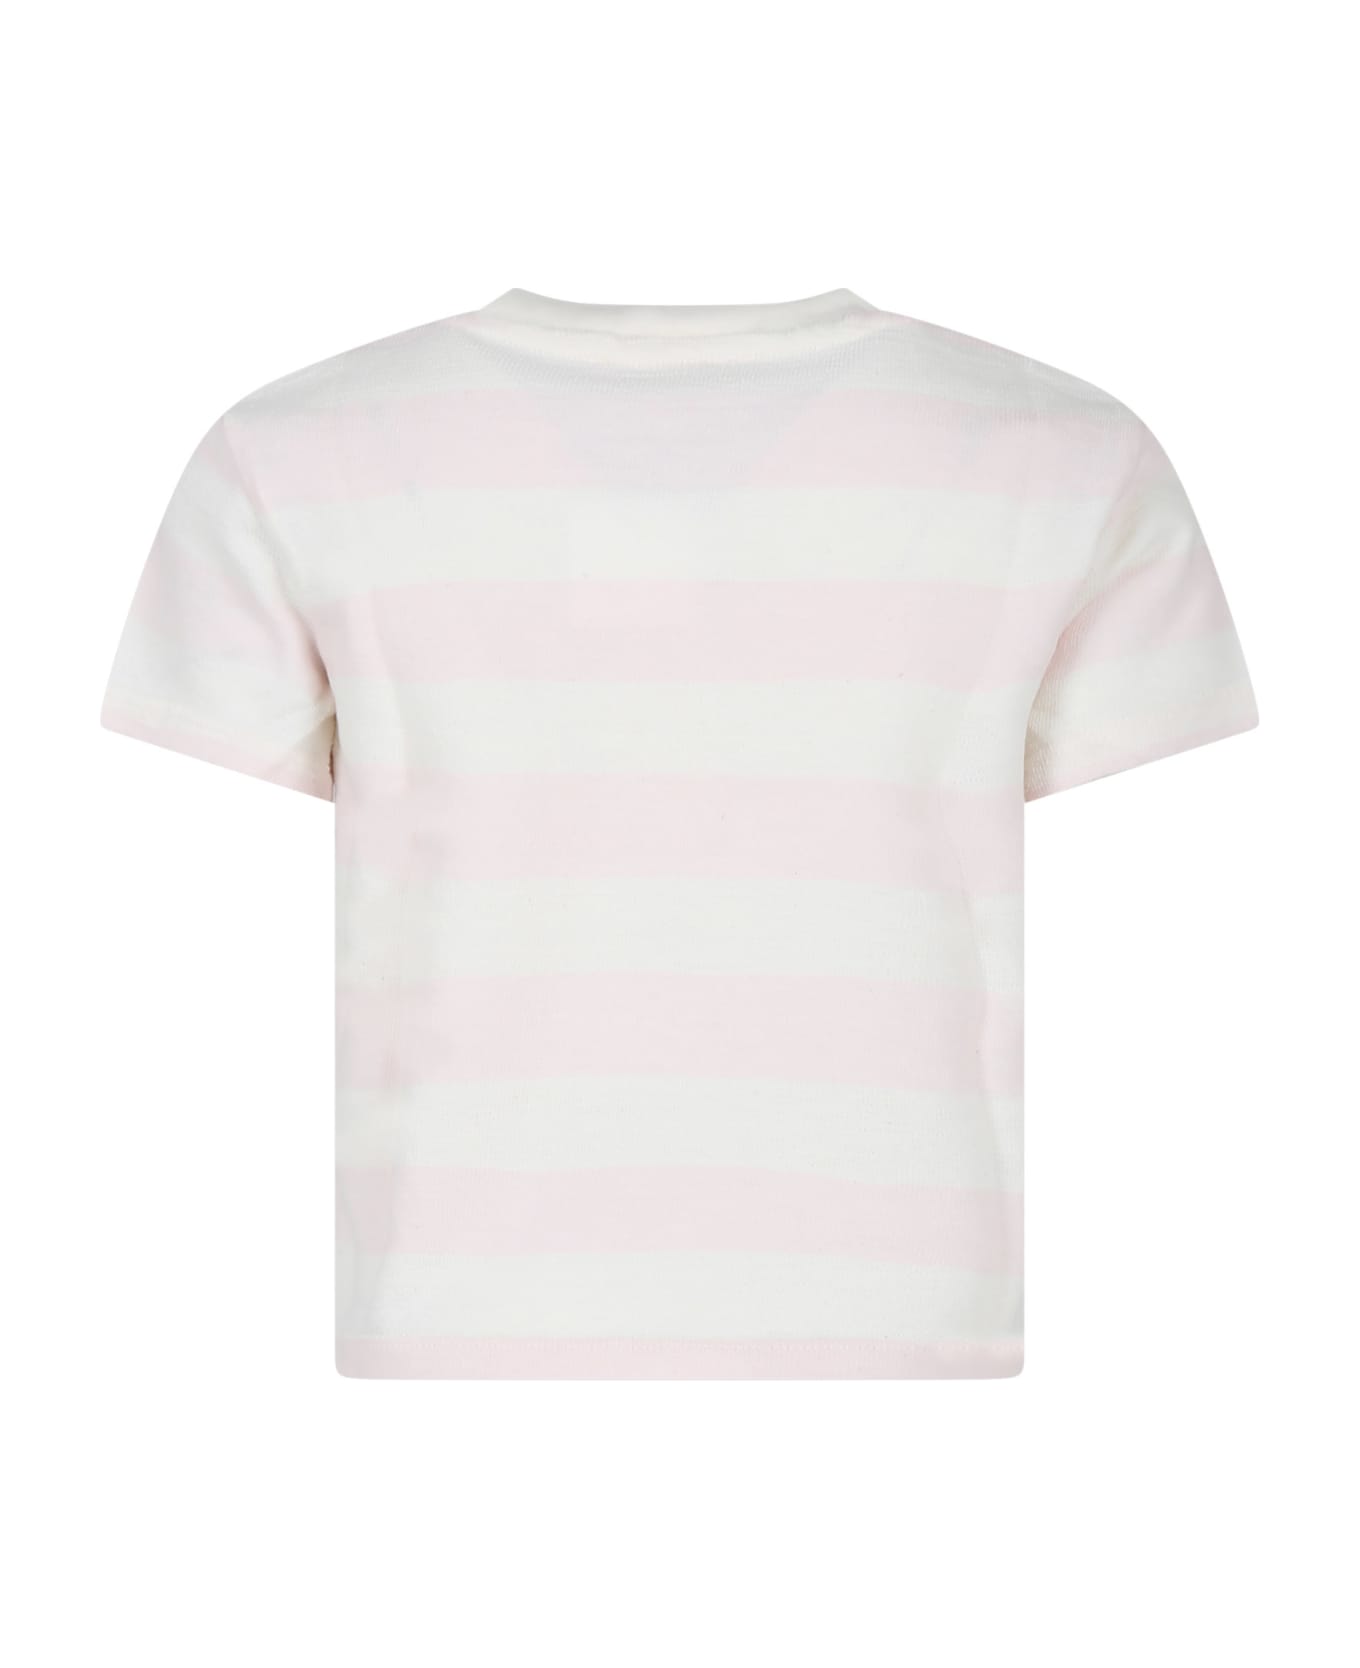 Bonpoint Ivory T-shirt For Girl With Iconic Cherries - Bianco e Rosa